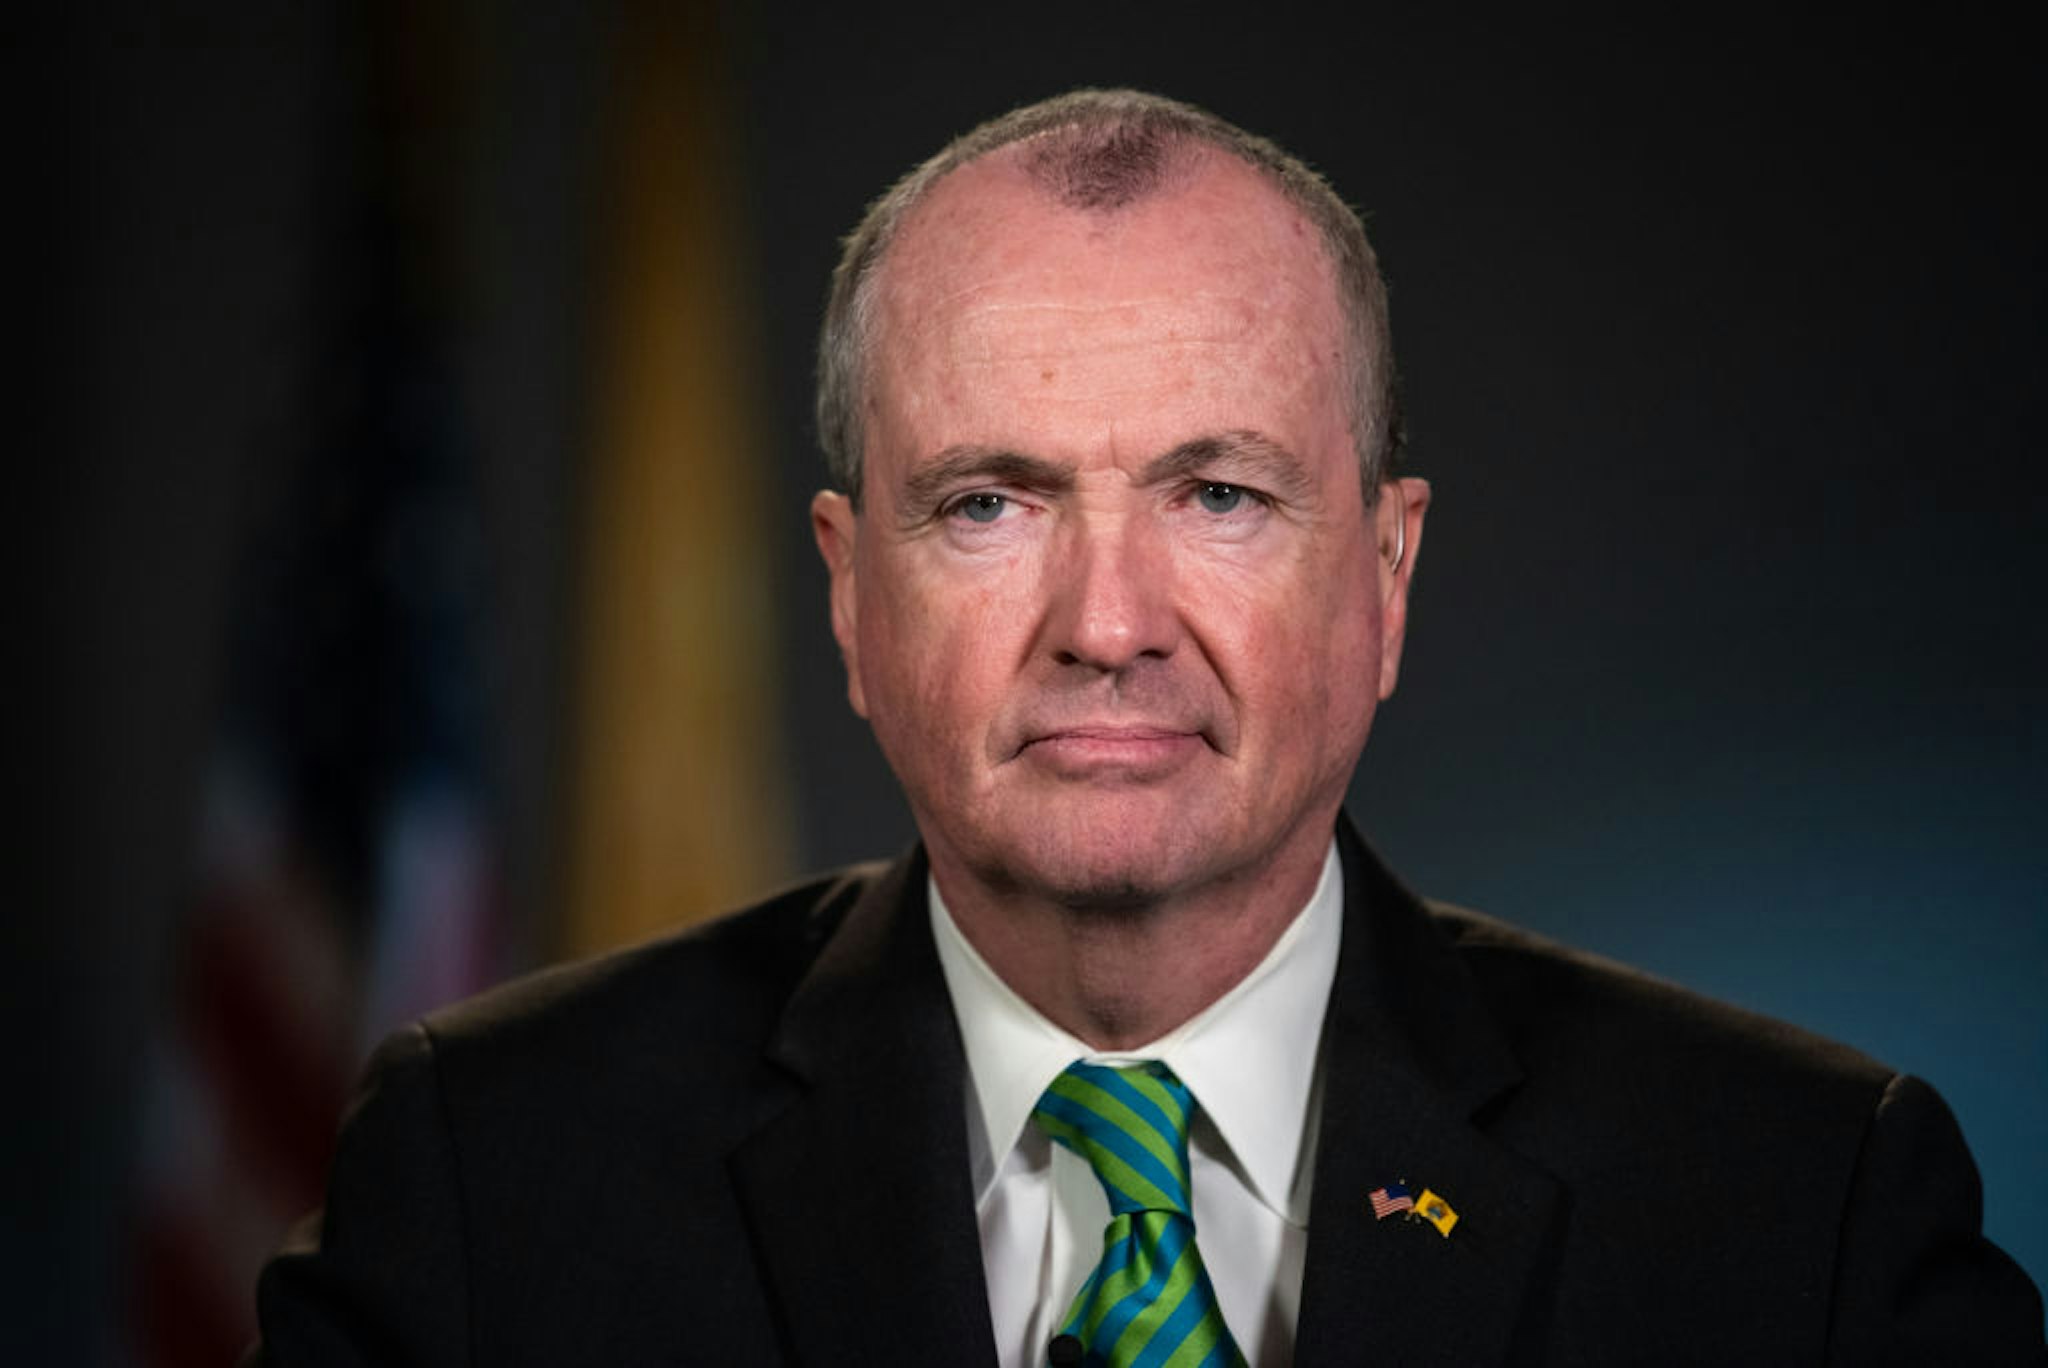 Phil Murphy, Governor of New Jersey, listens during a Bloomberg Television interview in Newark, New Jersey, U.S., on Friday, March 8, 2019.